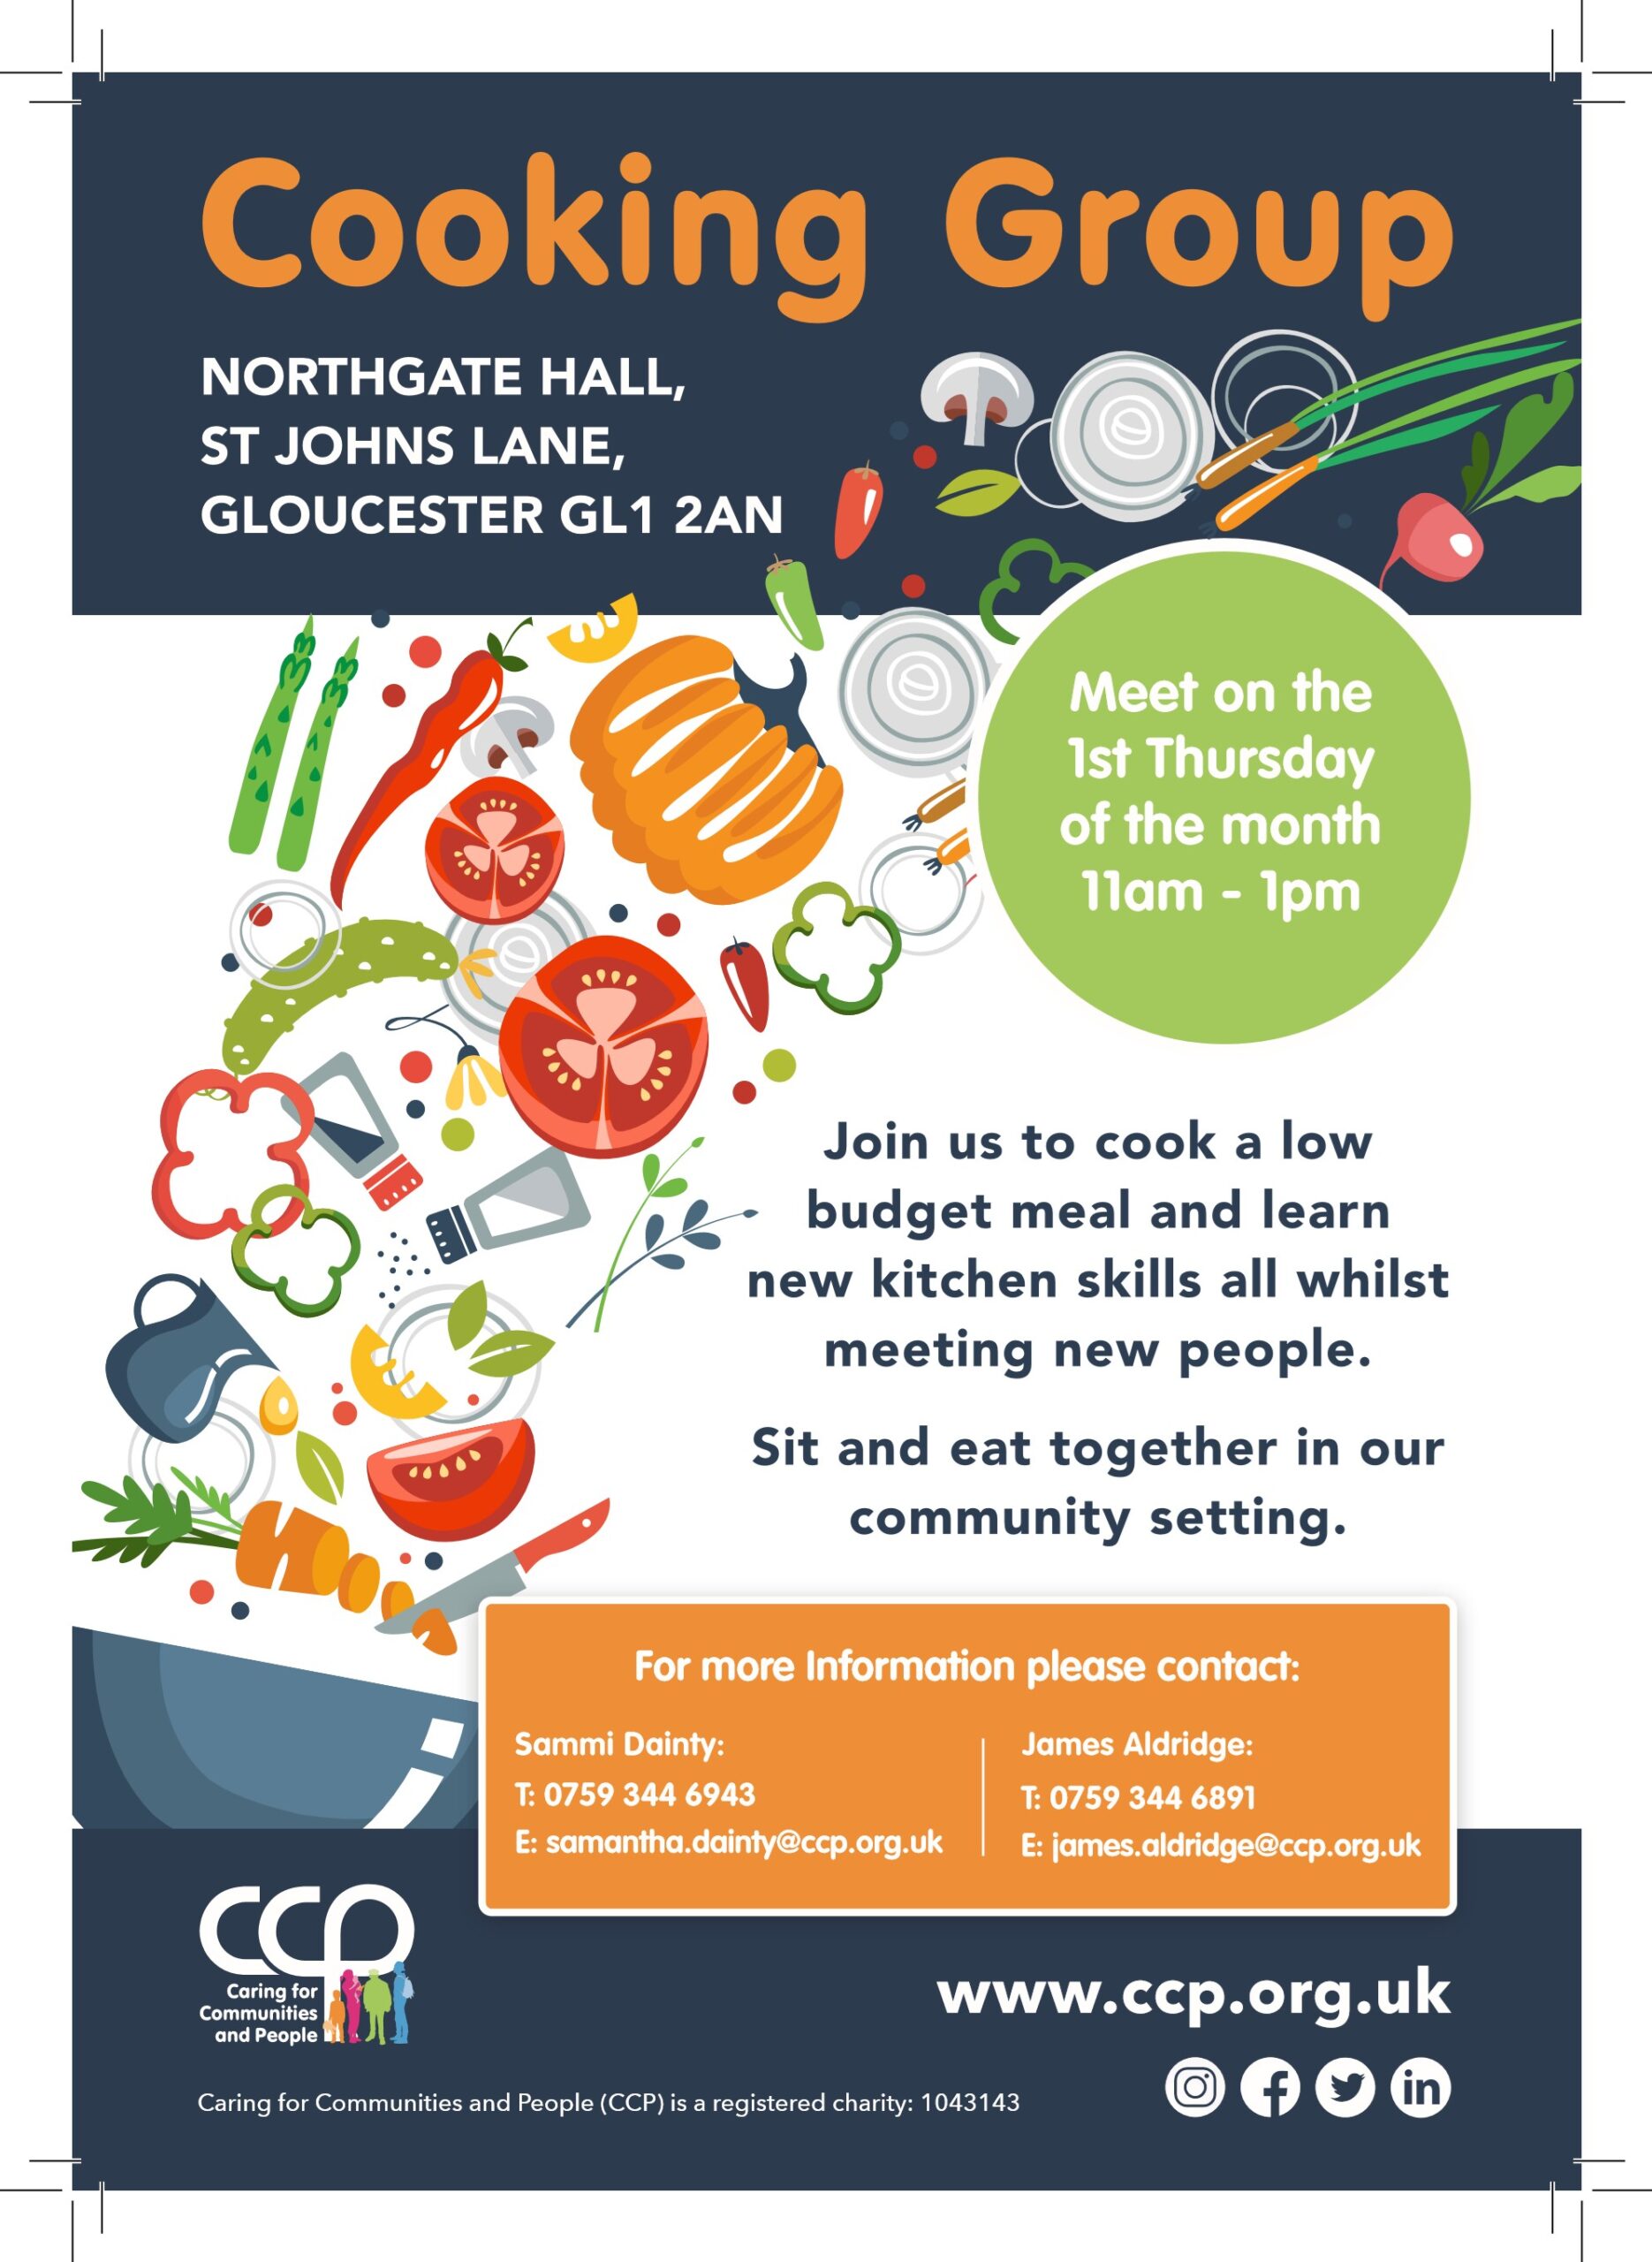 A colorful poster displaying a monthly cooking group that meet 1st Thursday of every month 11am - 1pm at northgate Hall St Johns Lane, Gloucester GL1 2AN contact Sammi Dainty at CCP for more information